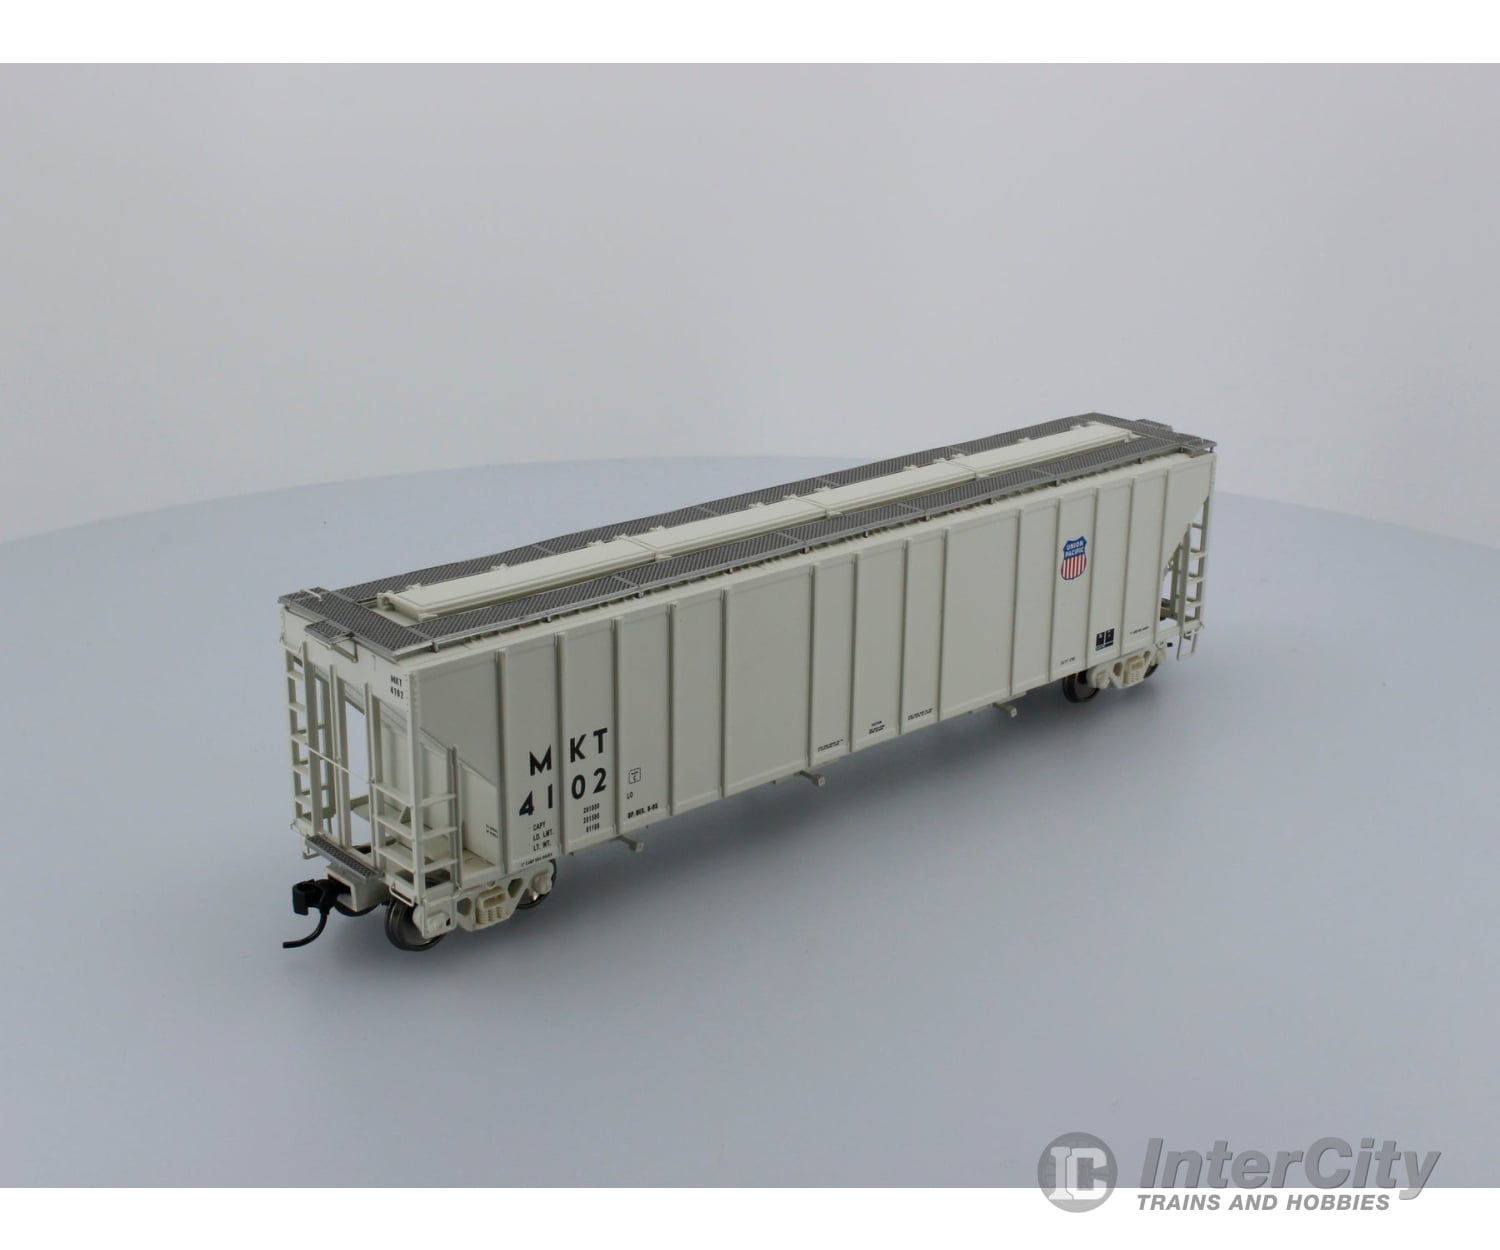 Walthers 93241201 Ho Evans 4782 3 Bay Covered Hopper Mkt 4102 Freight Cars